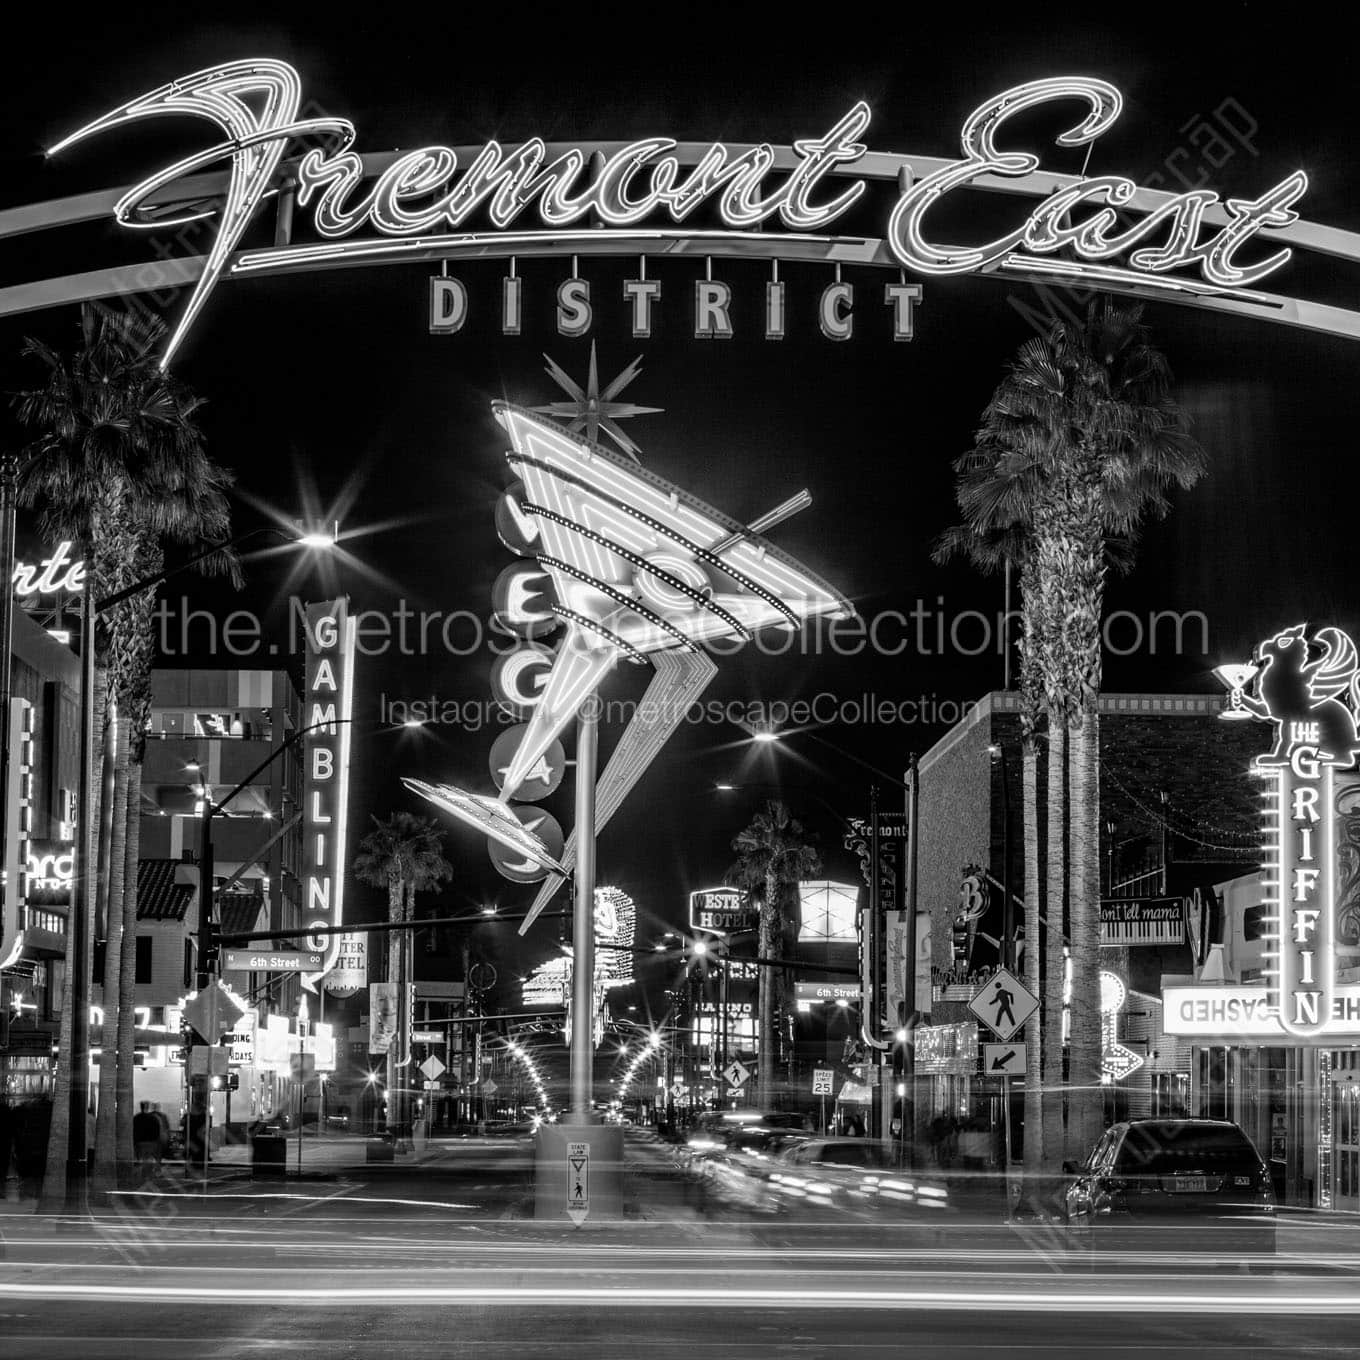 fremont east district at night Black & White Wall Art